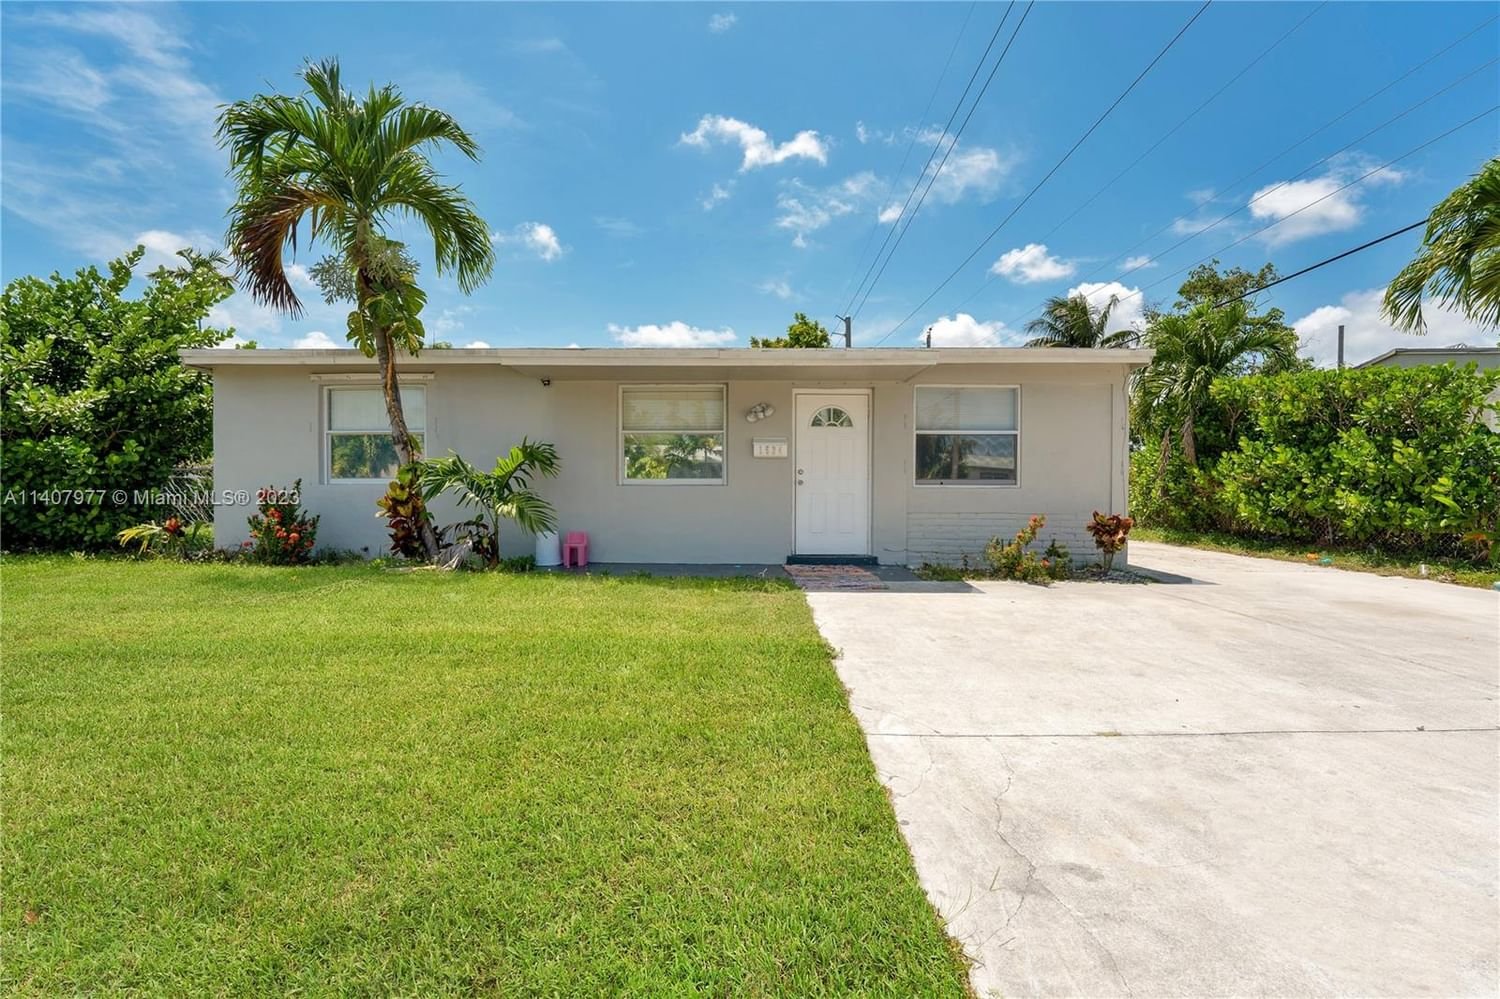 Real estate property located at 1524 22nd Ct, Broward County, Hollywood, FL